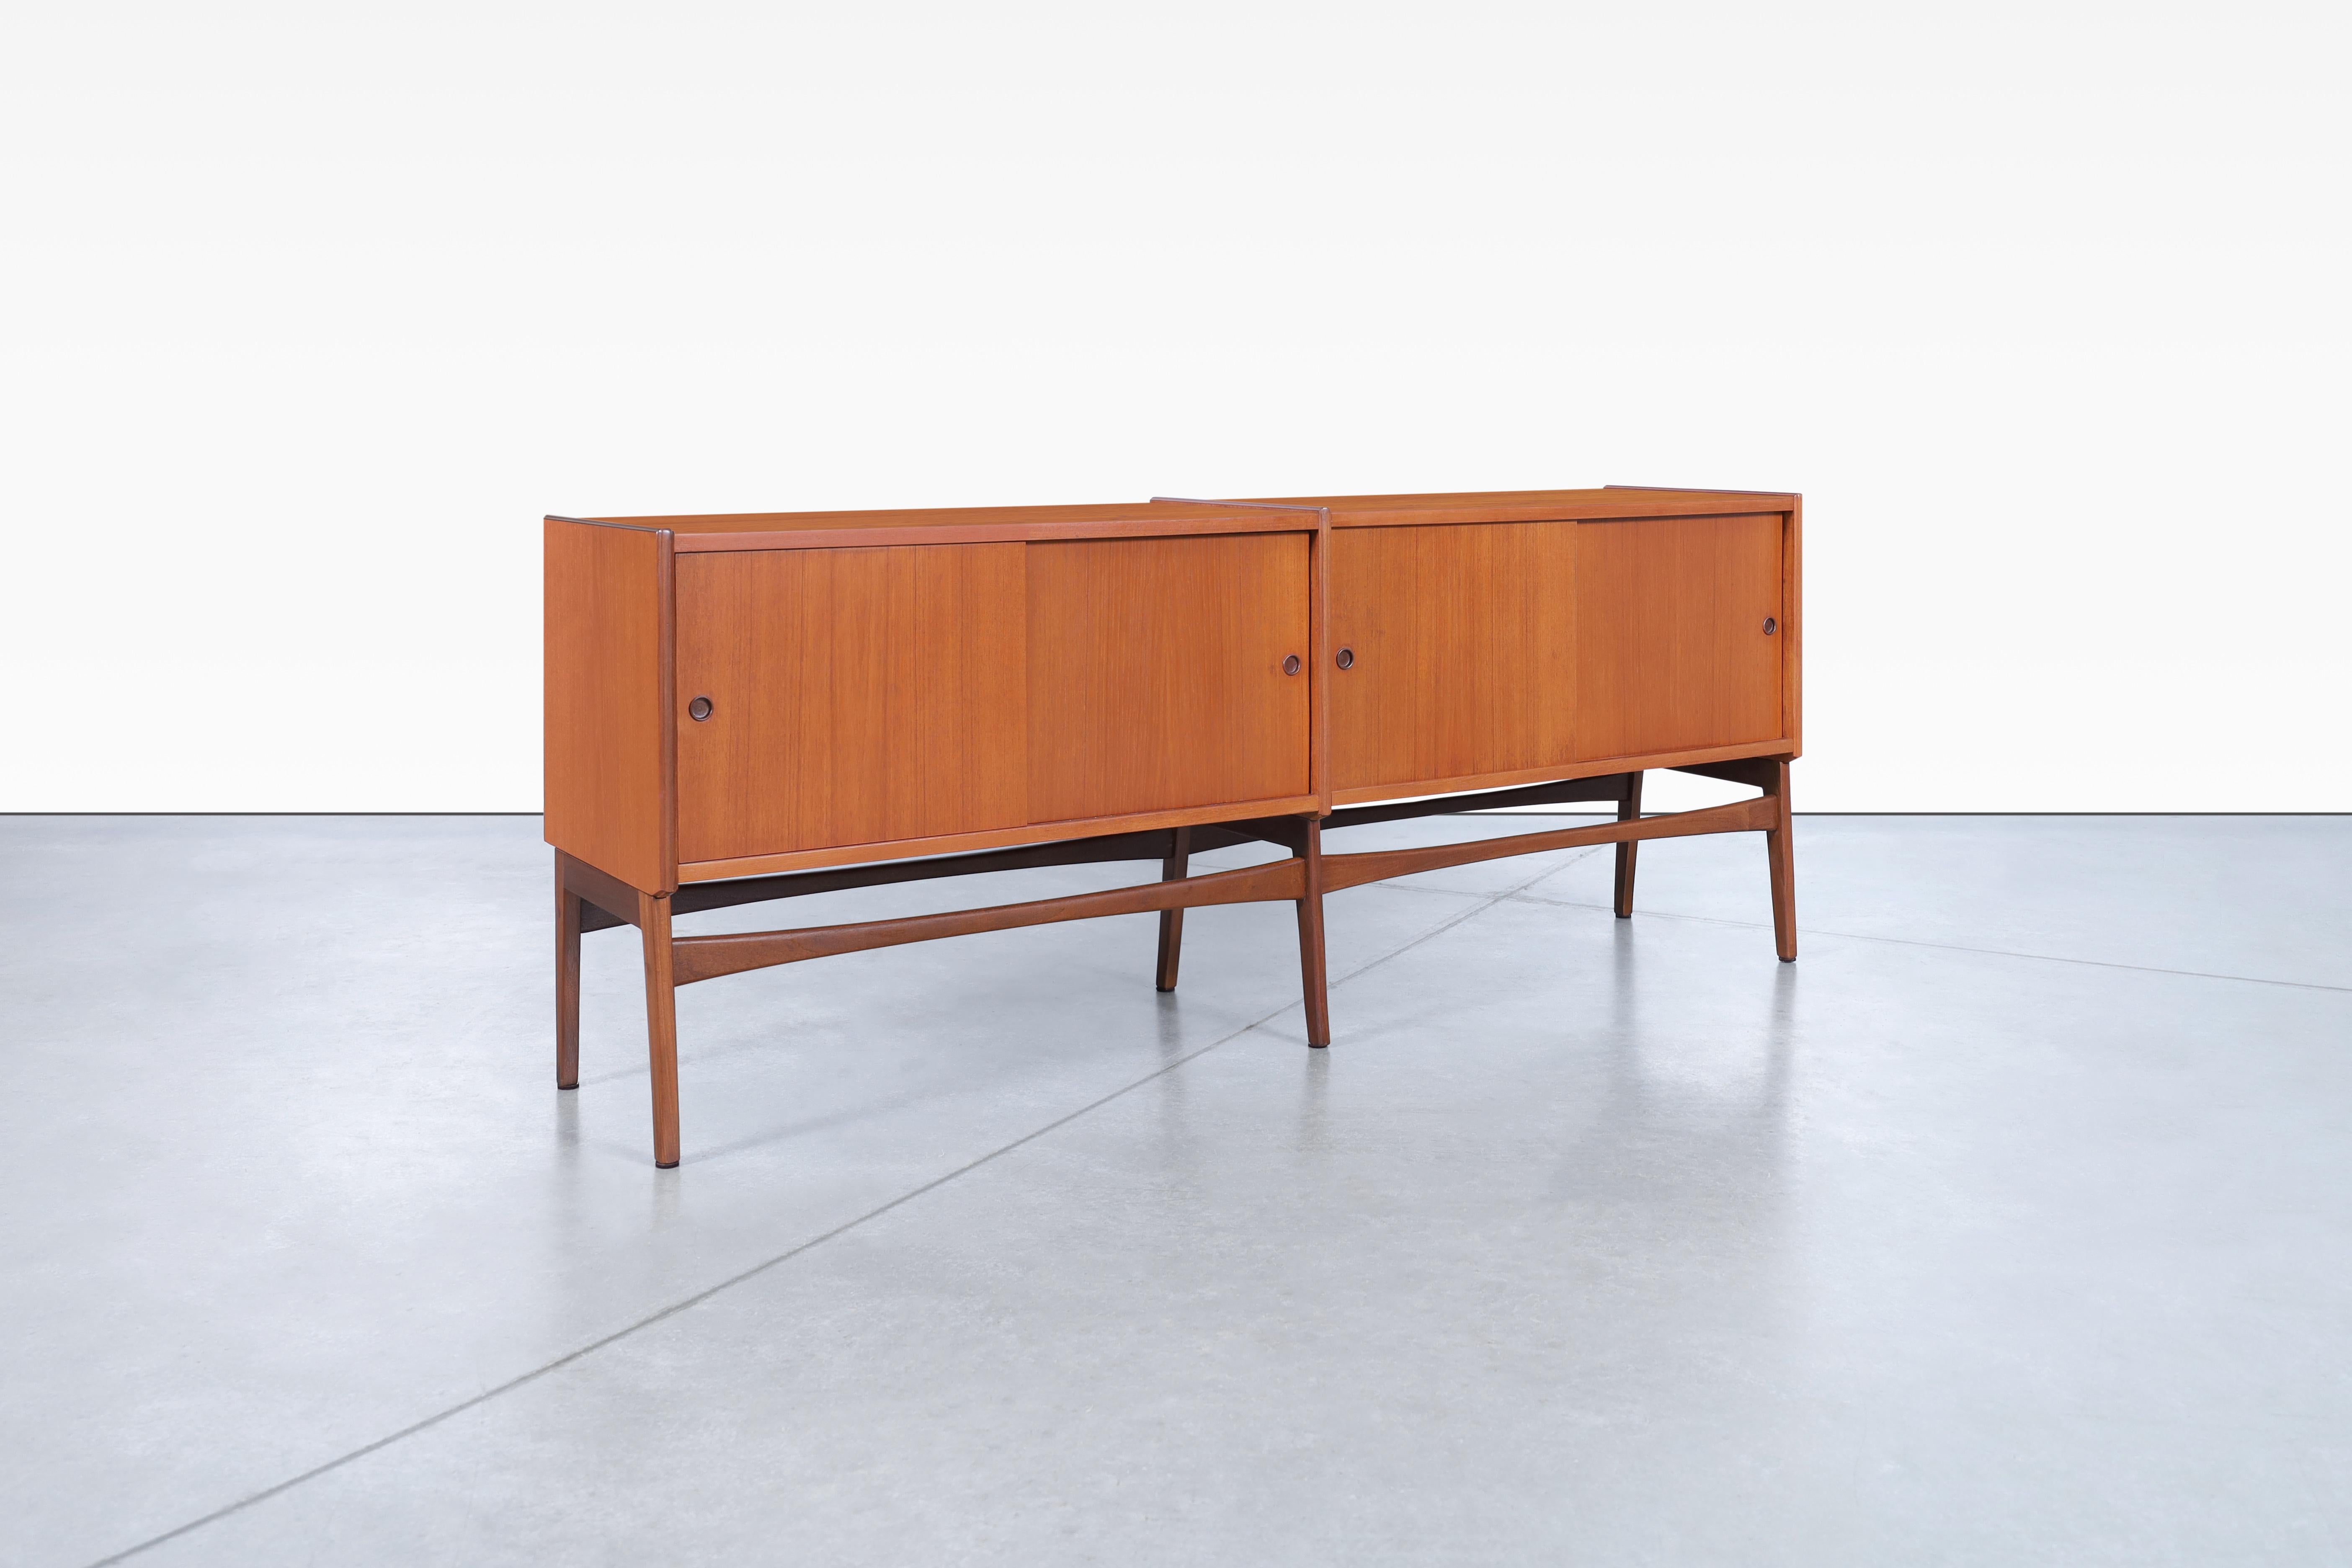 Danish modern teak credenza designed in Denmark, circa 1960s. This beautiful refinished piece offers four sliding doors that effortlessly conceal your belongings while adding an element of sleek design to your space. The credenza's angled legs and